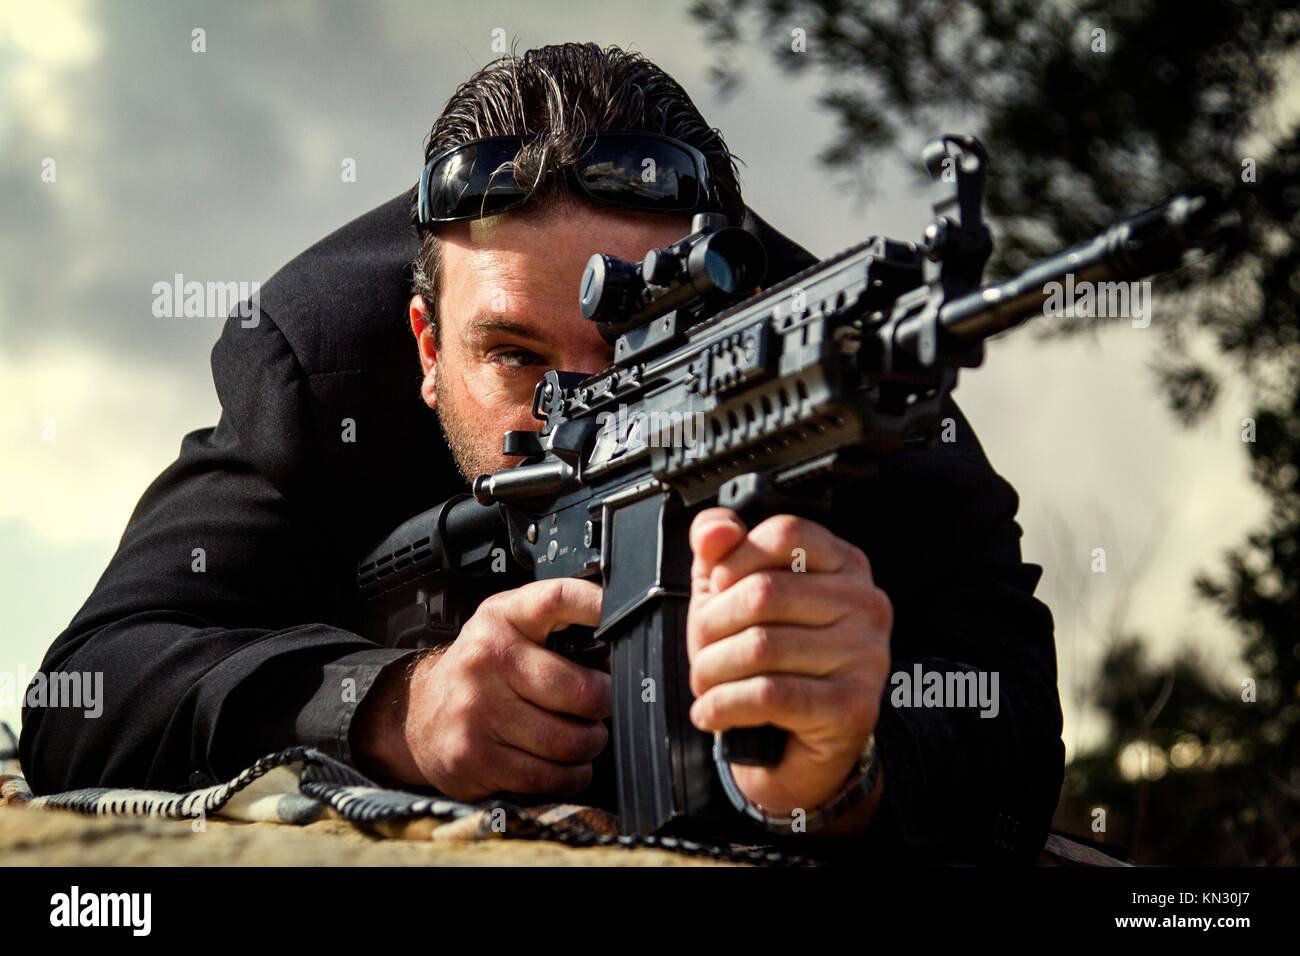 View of a contracted type killer agent wandering with a long jacket and machine gun. Stock Photo